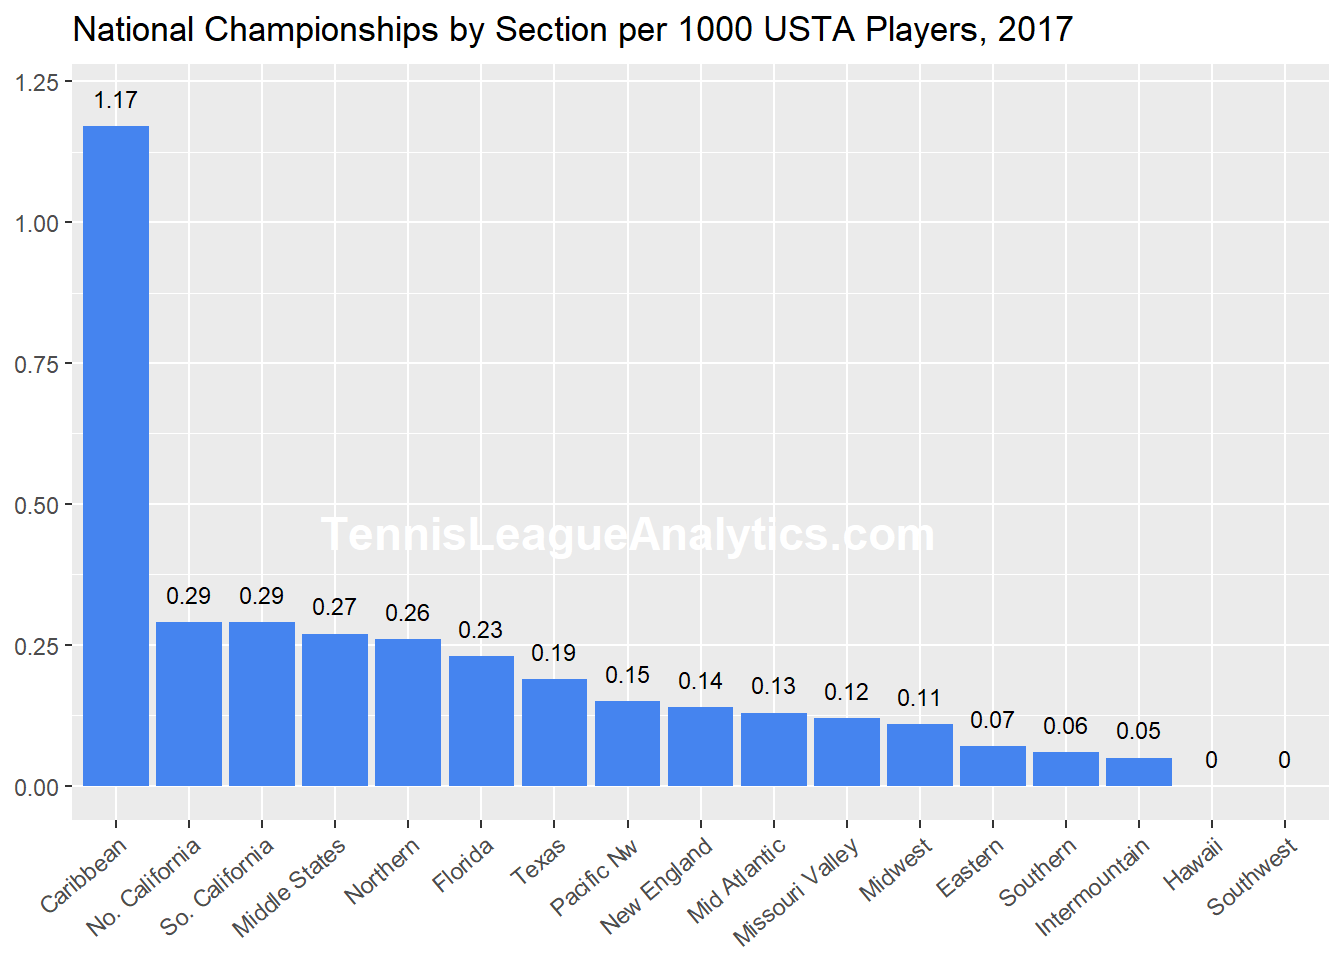 USTA Tennis League Stats for 2017 players and national championships by USTA section